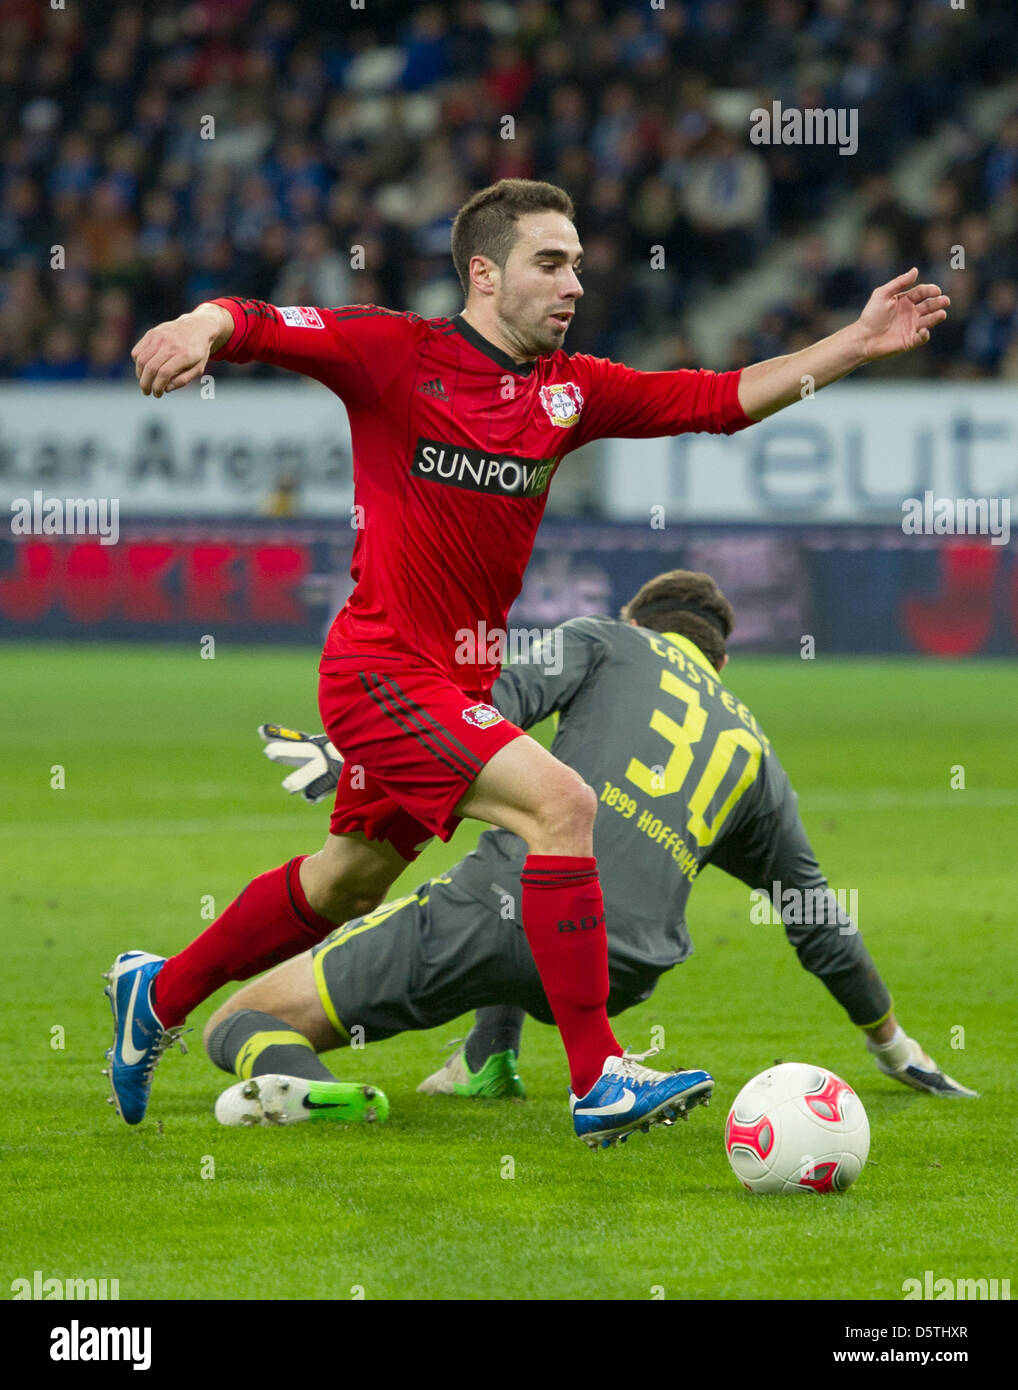 Leverkusen's Daniel Carvajal (FRONT) scores the 0:2 against Hoffenheim's goalkeeper Koen Casteels during the German Bundesliga soccer match 1899 Hoffenheim vs Bayer 04 Leverkusen at Rhein Neckar Arena in Sinsheim, Germany, 25 November 2012. Photo: Uwe Anspach  (ATTENTION: EMBARGO CONDITIONS! The DFL permits the further utilisation of up to 15 pictures only (no sequntial pictures or Stock Photo